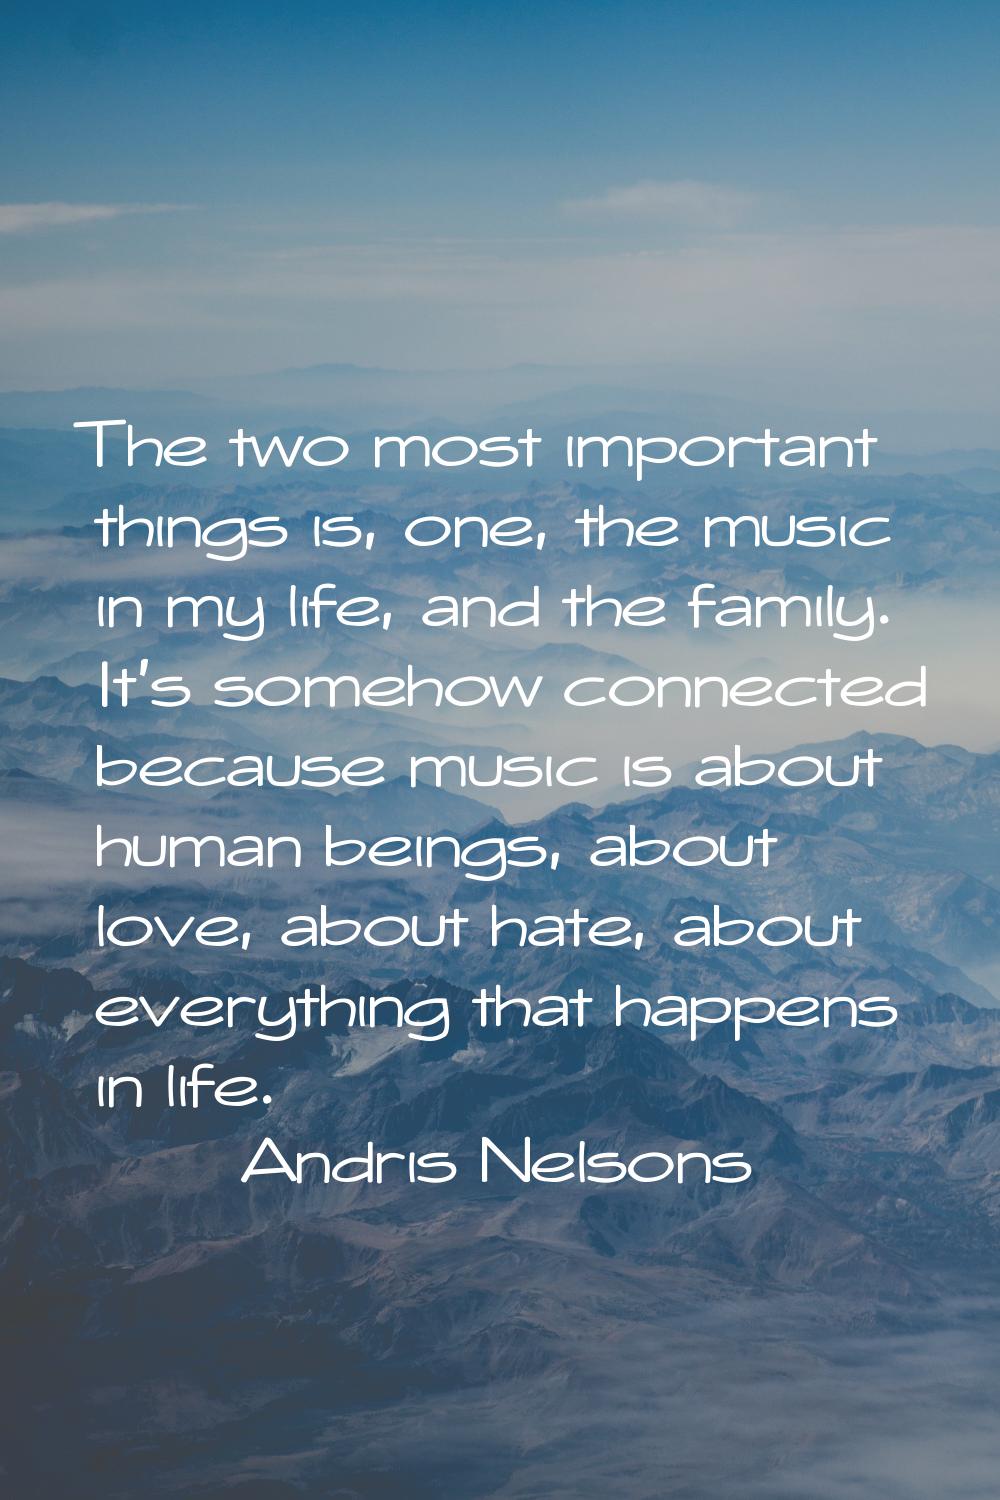 The two most important things is, one, the music in my life, and the family. It's somehow connected